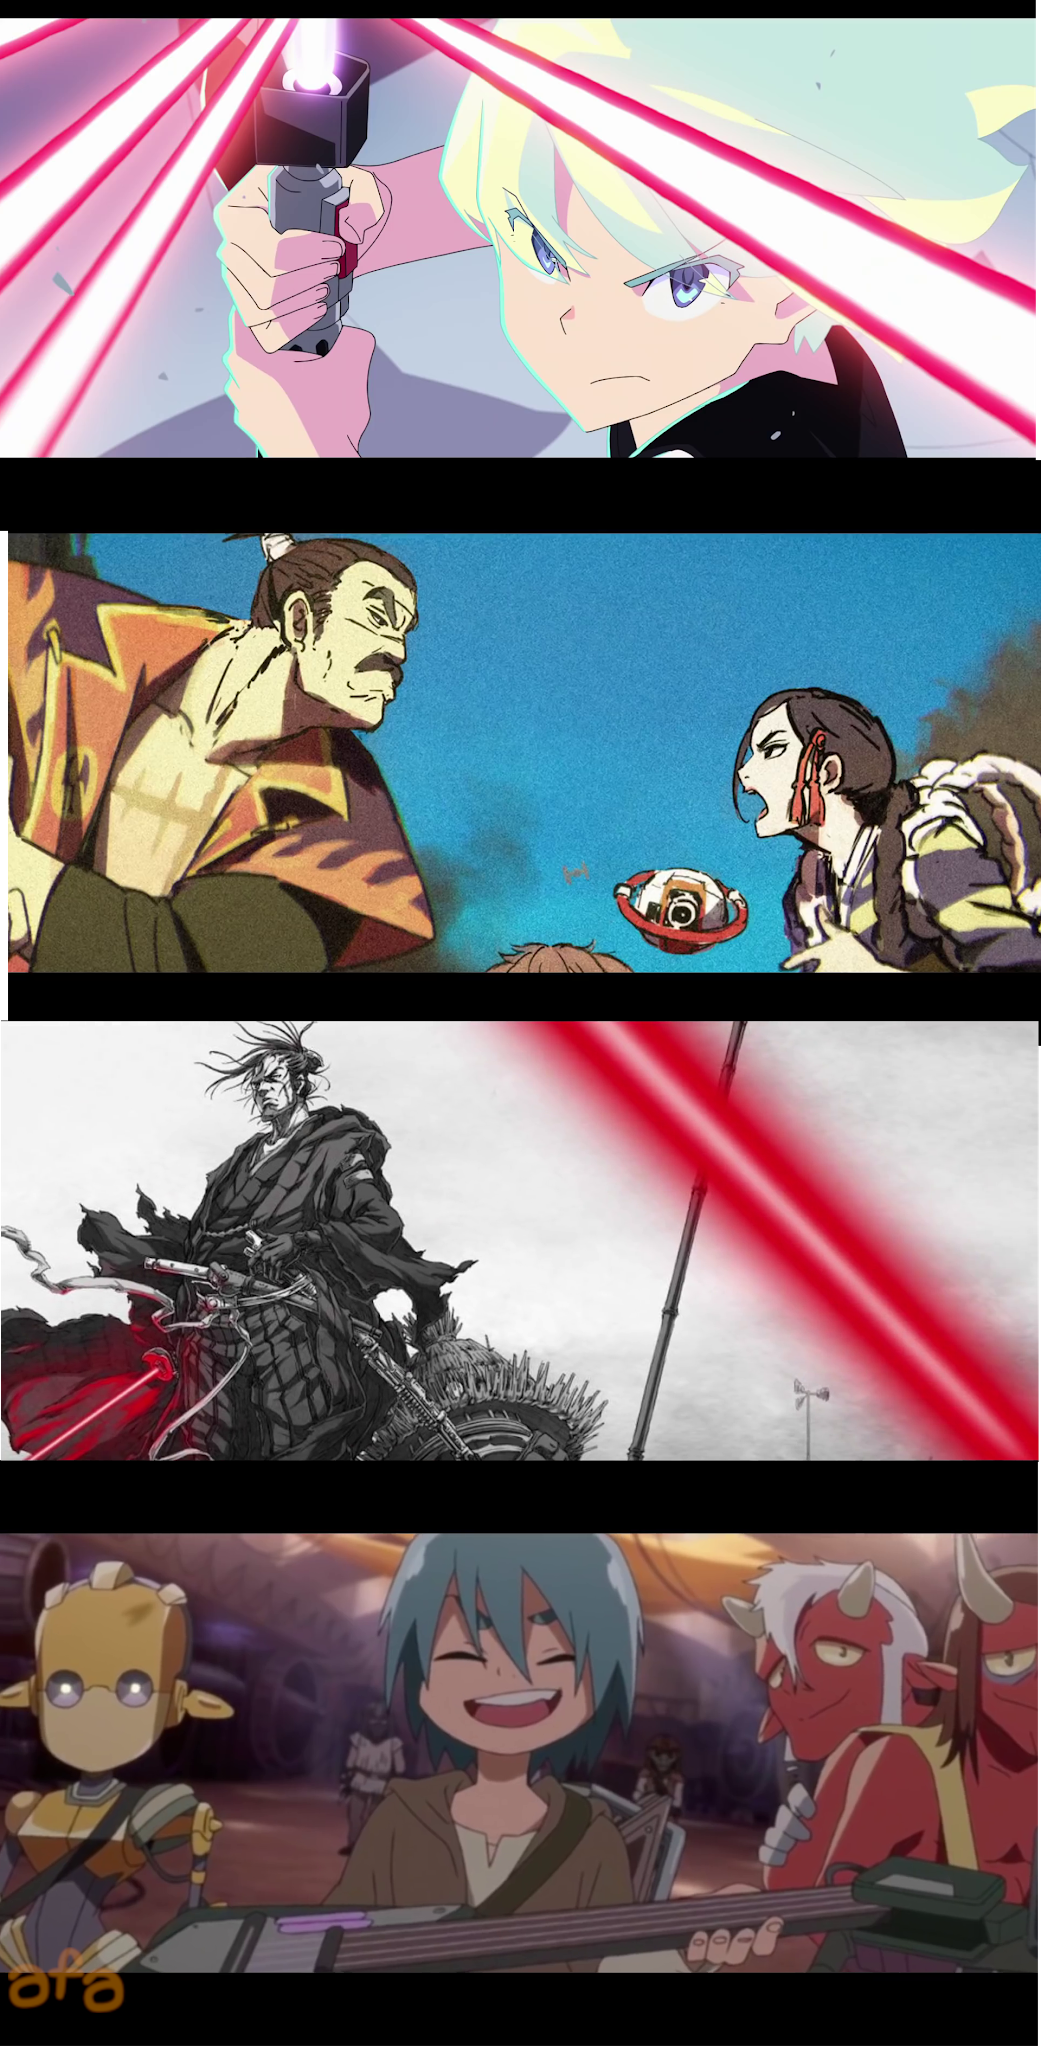 15 Anime To Watch Before Watching Star Wars: Visions